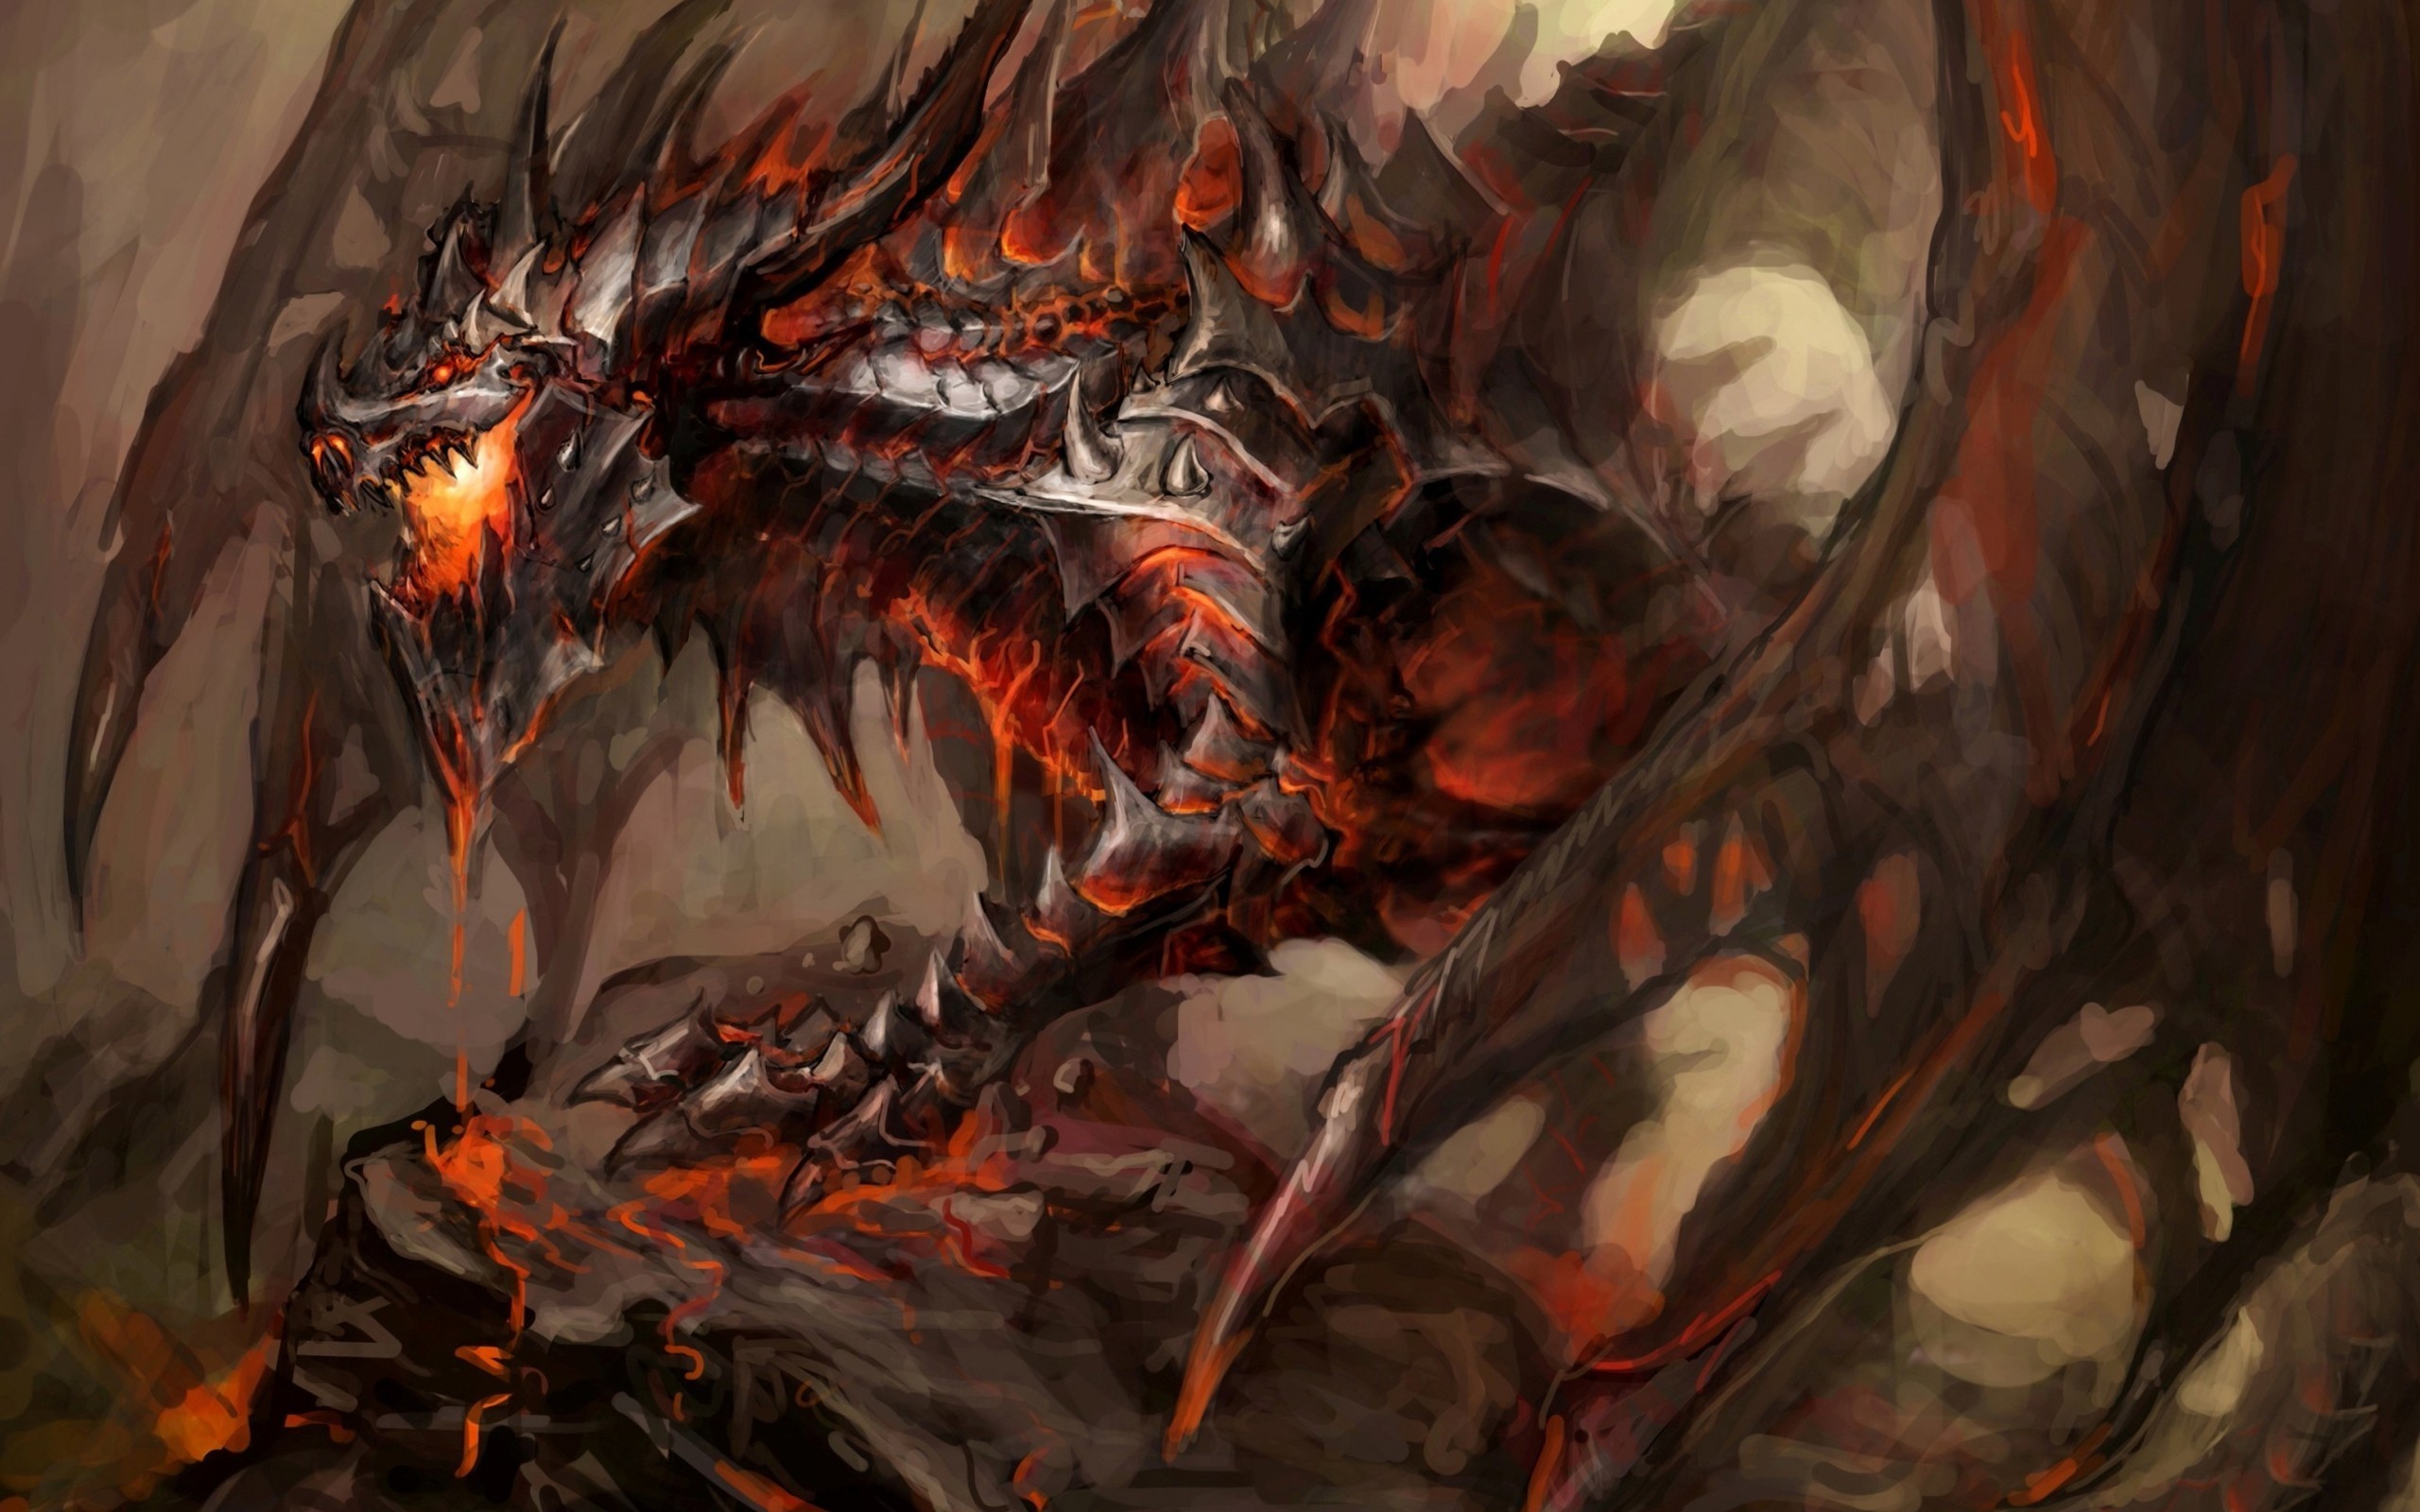 General 2560x1600 dragon fantasy art World of Warcraft Deathwing Blizzard Entertainment PC gaming creature video game art